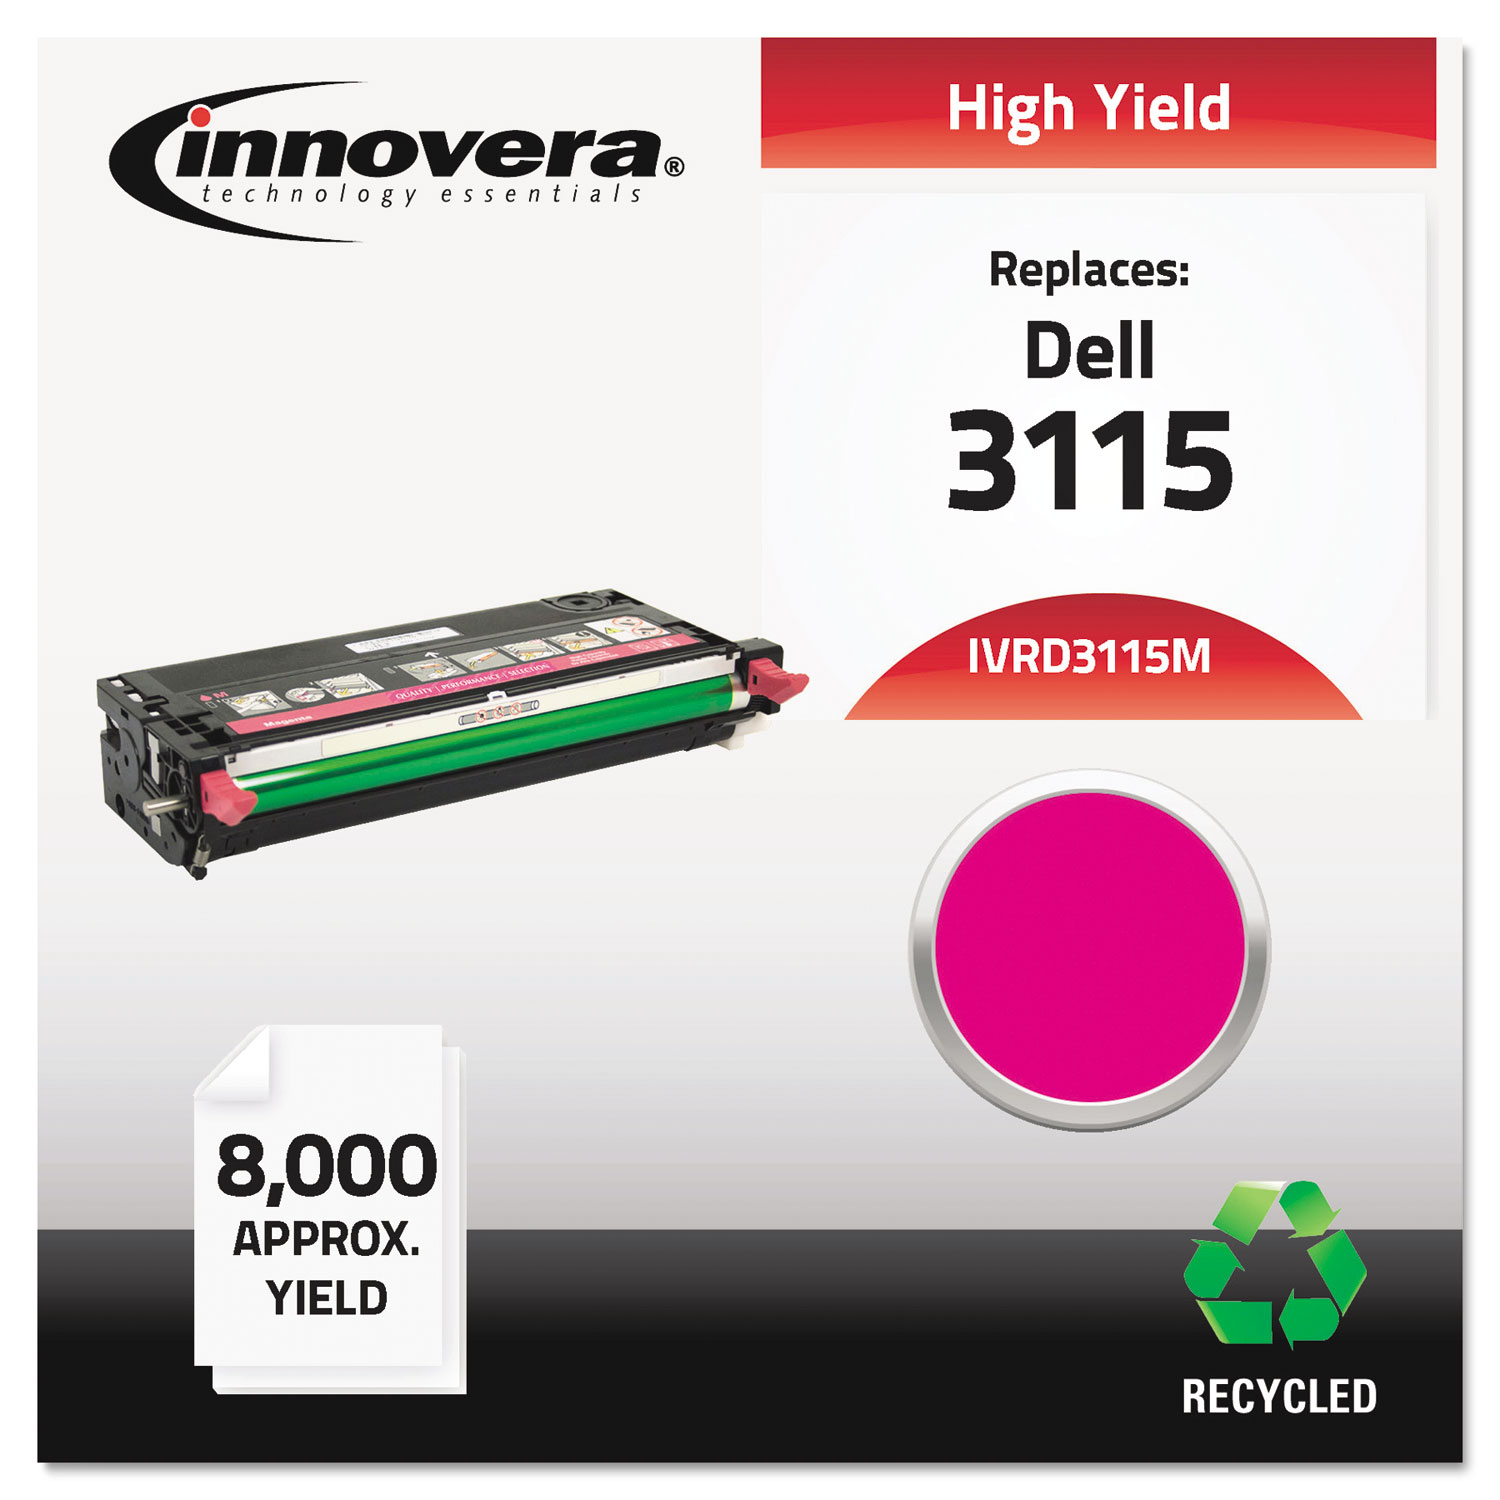  Innovera IVRD3115M Remanufactured 310-8399 (3115) High-Yield Toner, 8000 Page-Yield, Magenta (IVRD3115M) 